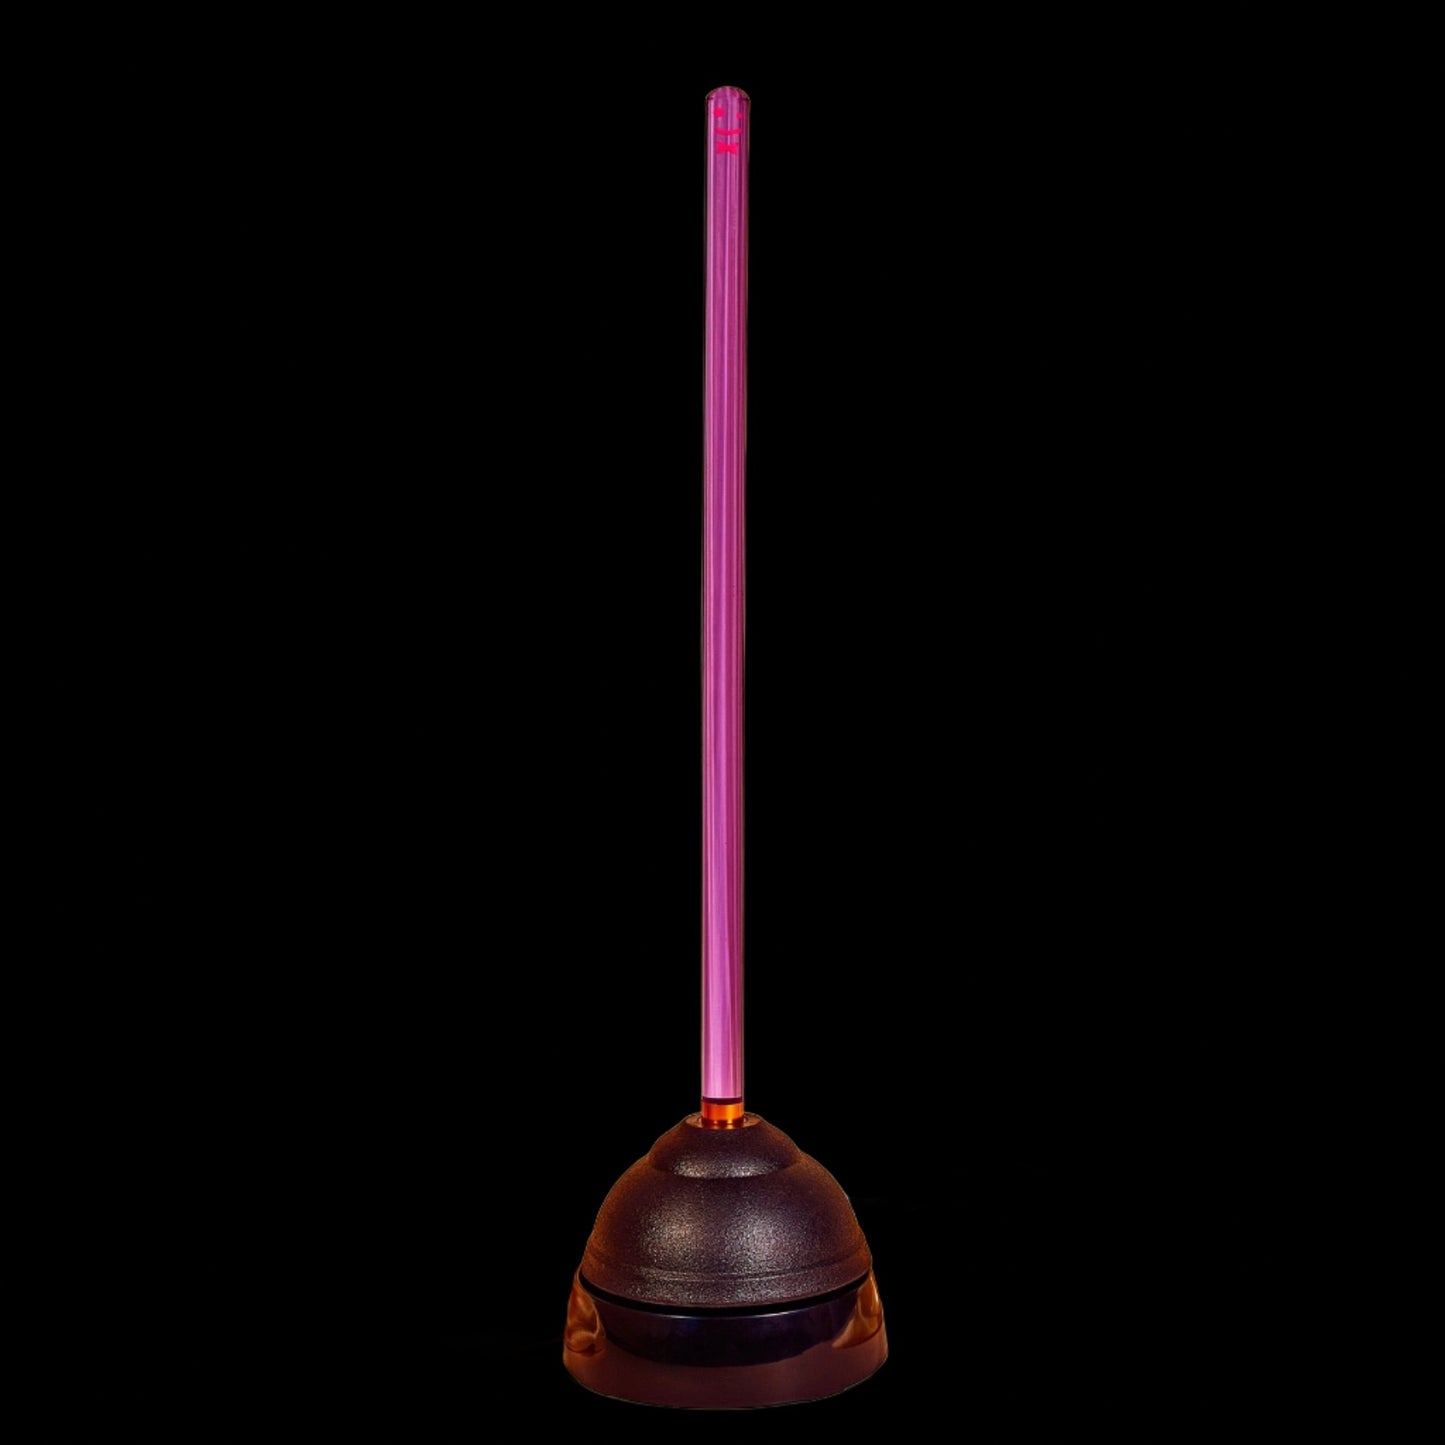 The Plunger